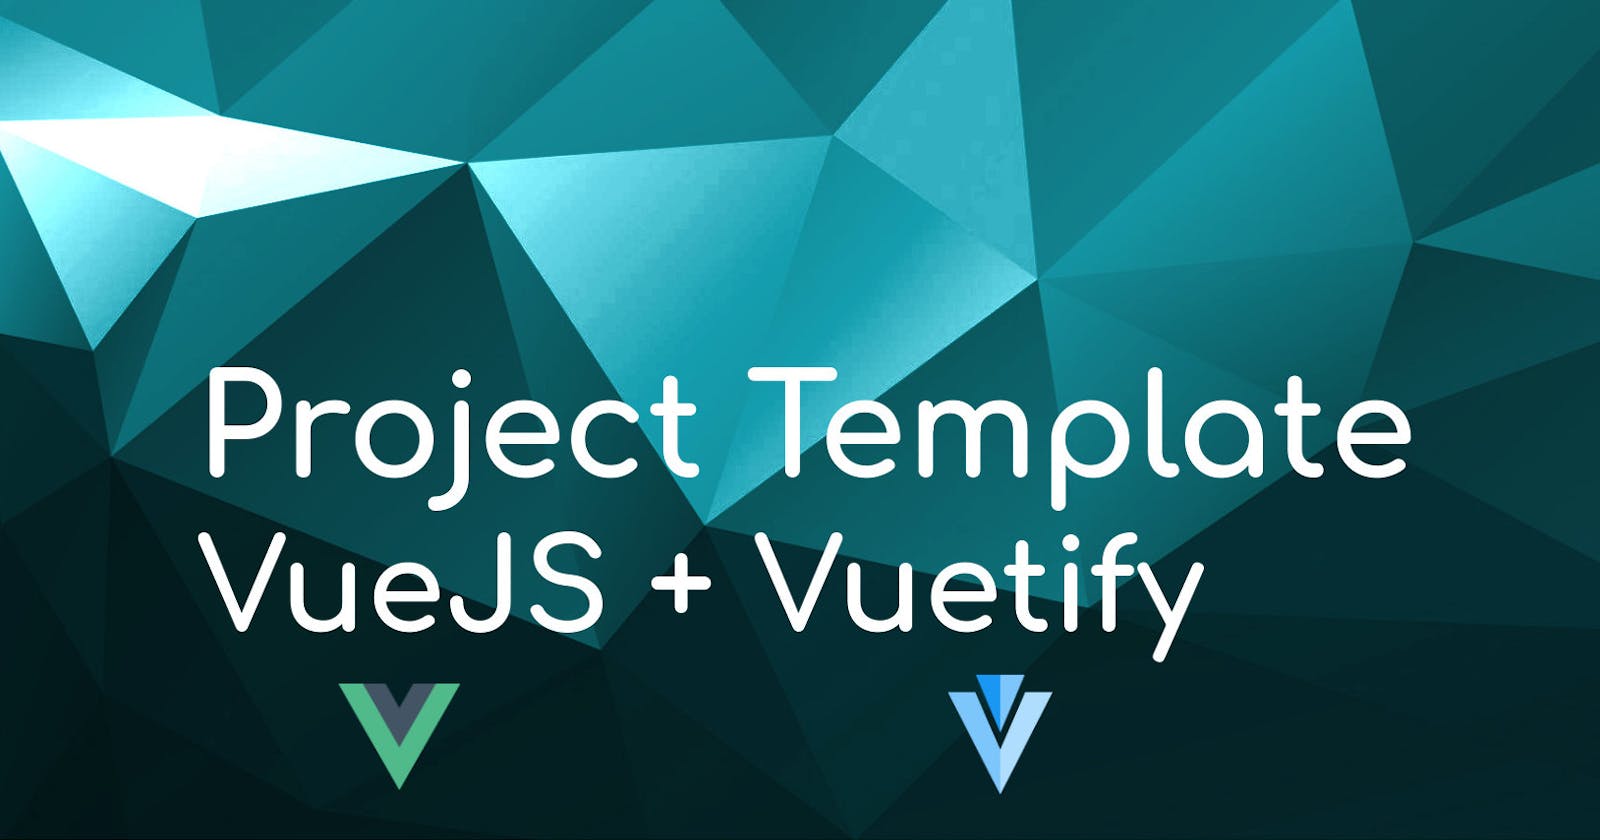 A great way to structure and bootstrap VueJS + Vuetify + API projects